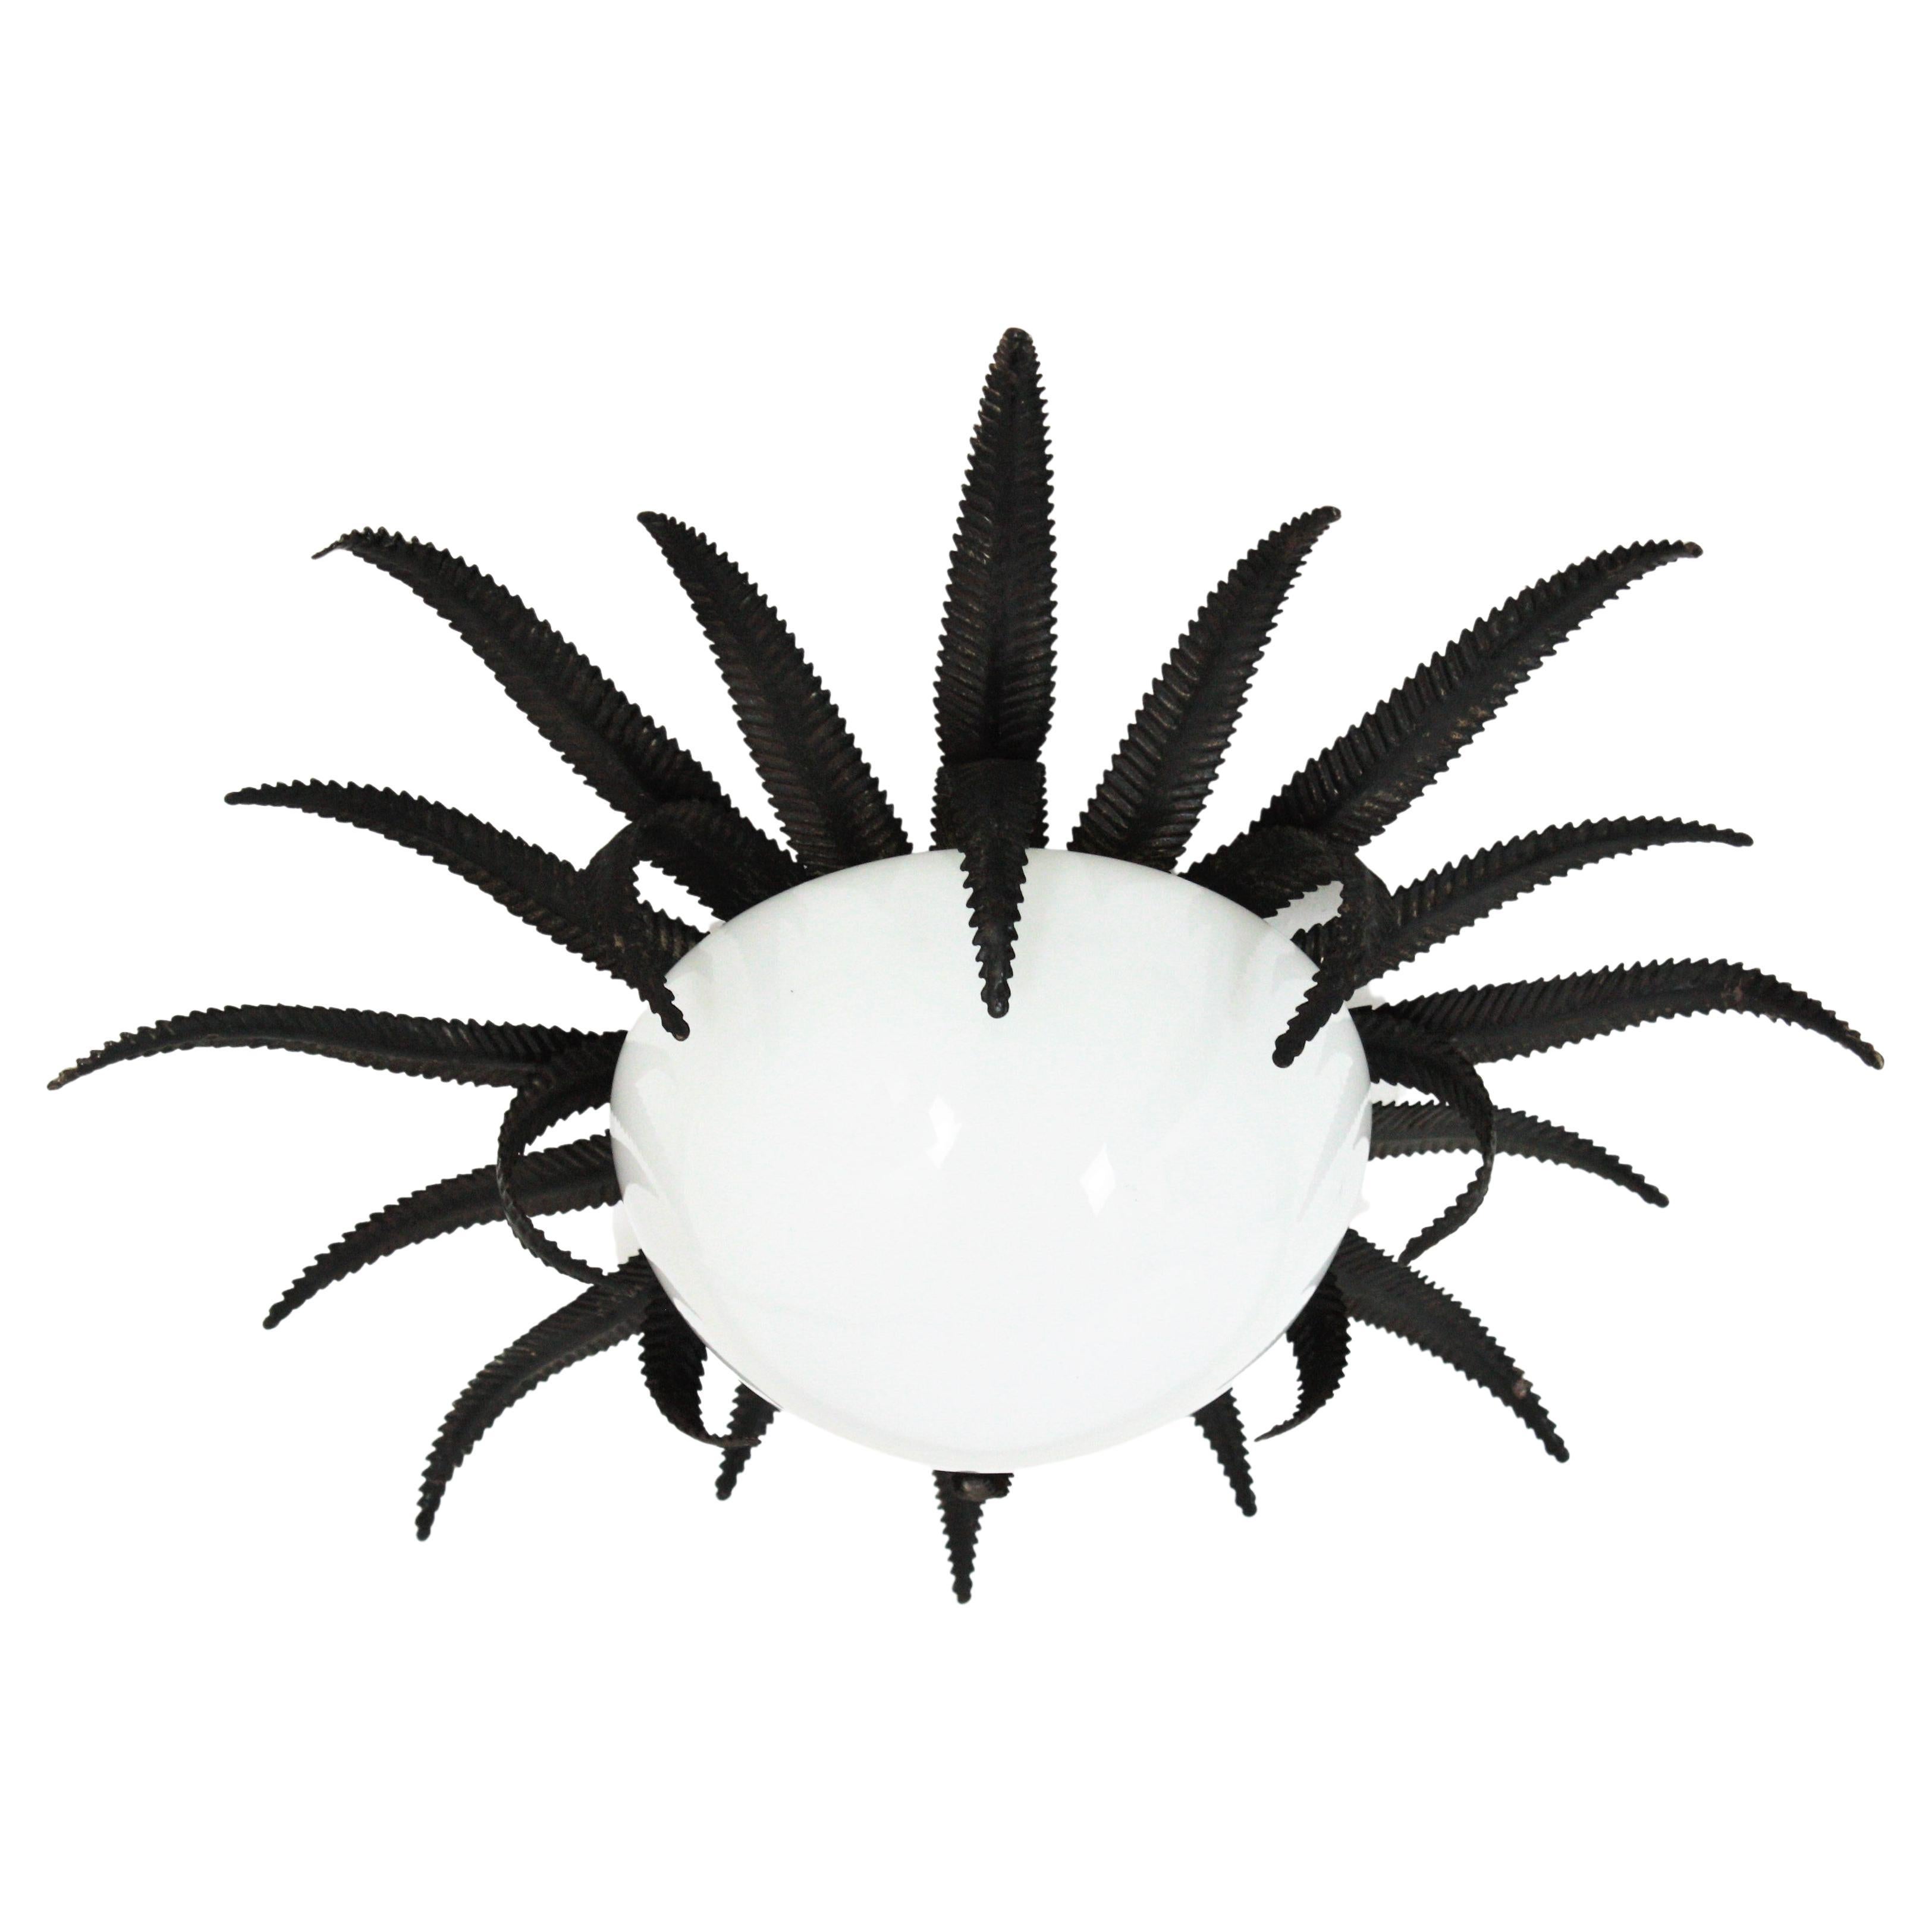 Outstanding French sunburst flush mount in black metal and milk glass, 1950s
This Sunburst starburst ceiling light fixture has an eye-catching construction. The backplace is patinated in black and it is a sunburst or starburst shape holding a